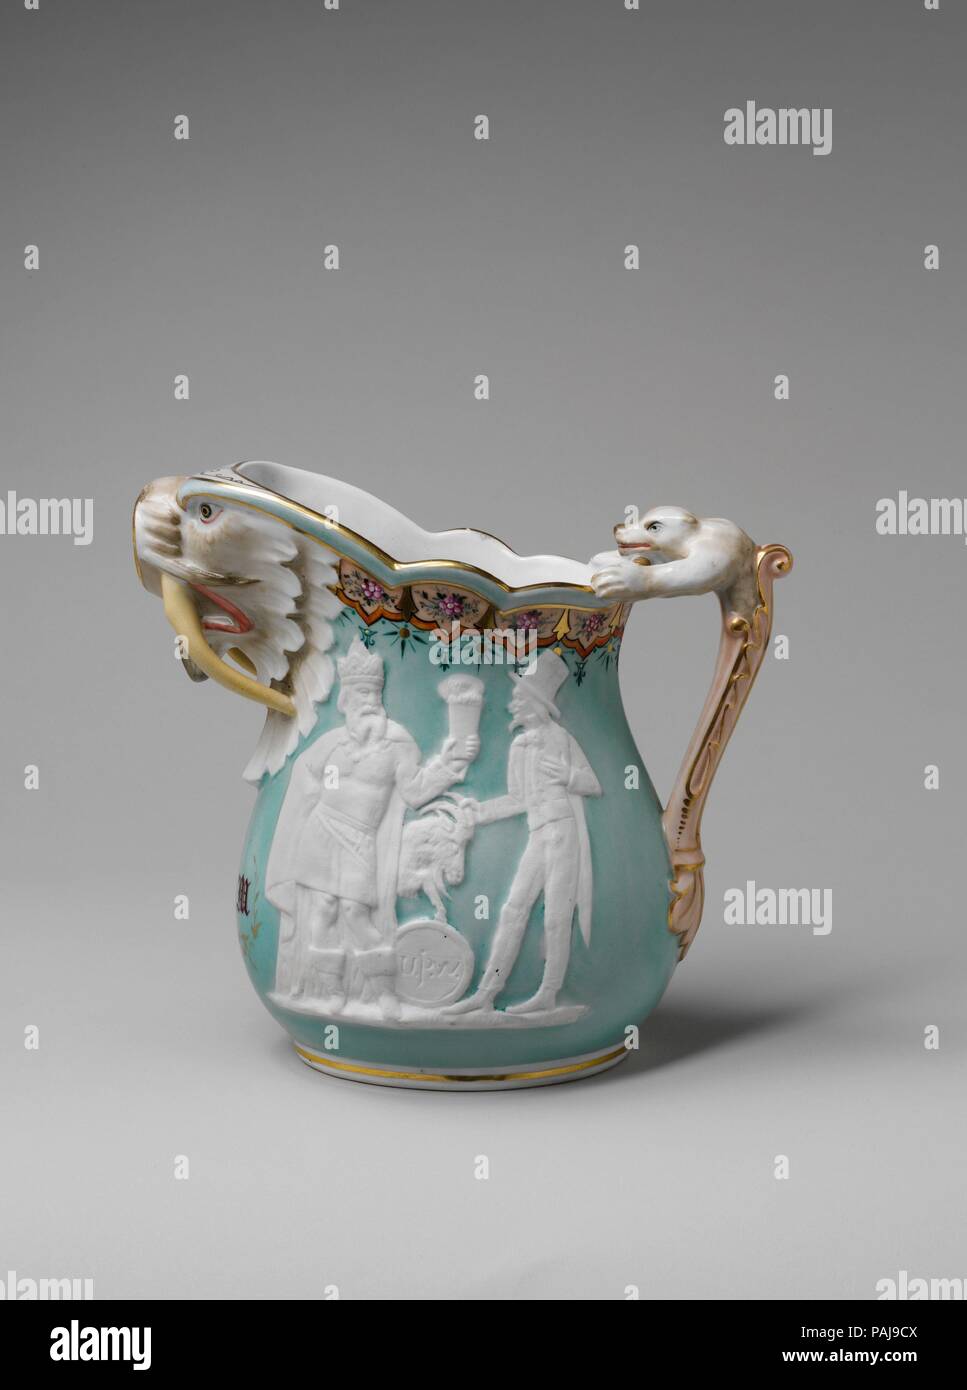 Pitcher. Culture: American. Dimensions: H. 9 1/2 in. (24.1 cm); W. 10 1/2 in. (26.7 cm); Diam. 6 1/4 in. (15.9 cm). Maker: Union Porcelain Works (1863-ca. 1922). Date: 1875-85.  Bret Harte rivaled Mark Twain in the field of late-nineteenth-century popular literature. On the front of this pitcher, Müller--inspired by Harte's 1870 poem 'The Heathen Chinee'--depicted the frontiersman Bill Nye confronting the Chinese immigrant Ah Sin during a card game. On the reverse, in a departure from the poem, King Gambrinus, the mythical Flemish inventor of beer, is seen offering Brother Jonathan, the Americ Stock Photo